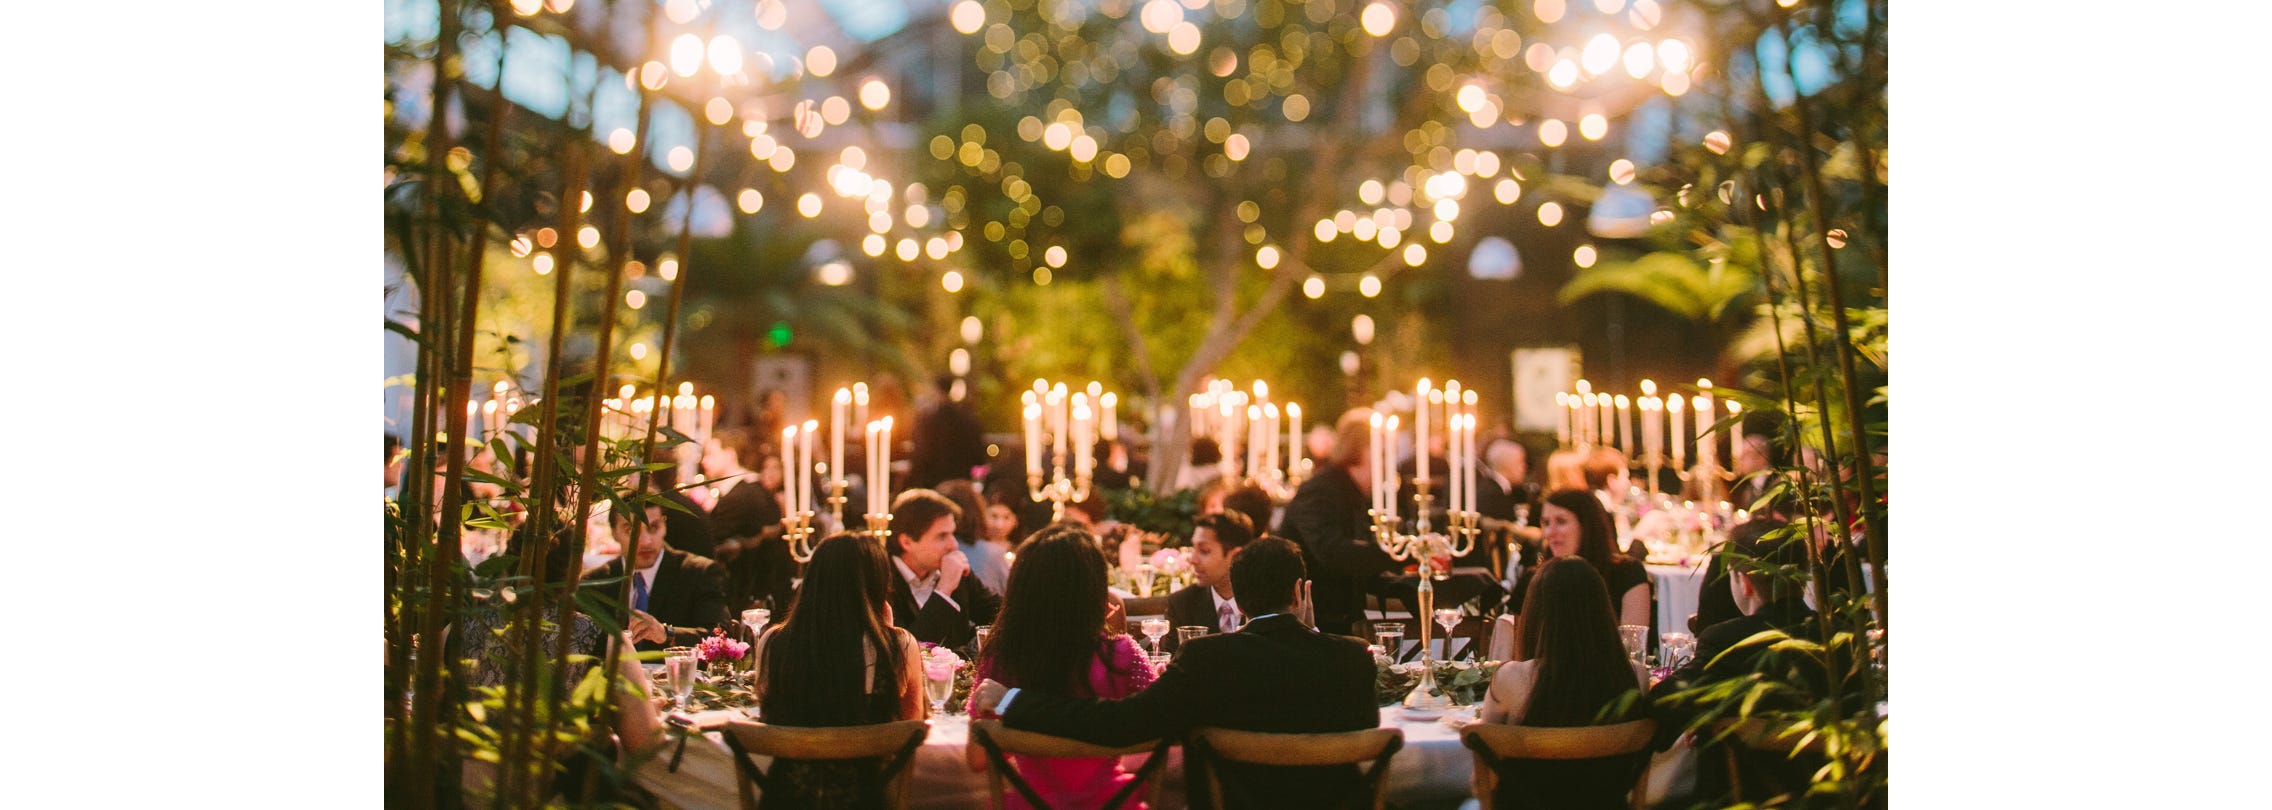 Rescheduling a Wedding: Rely on Your Team